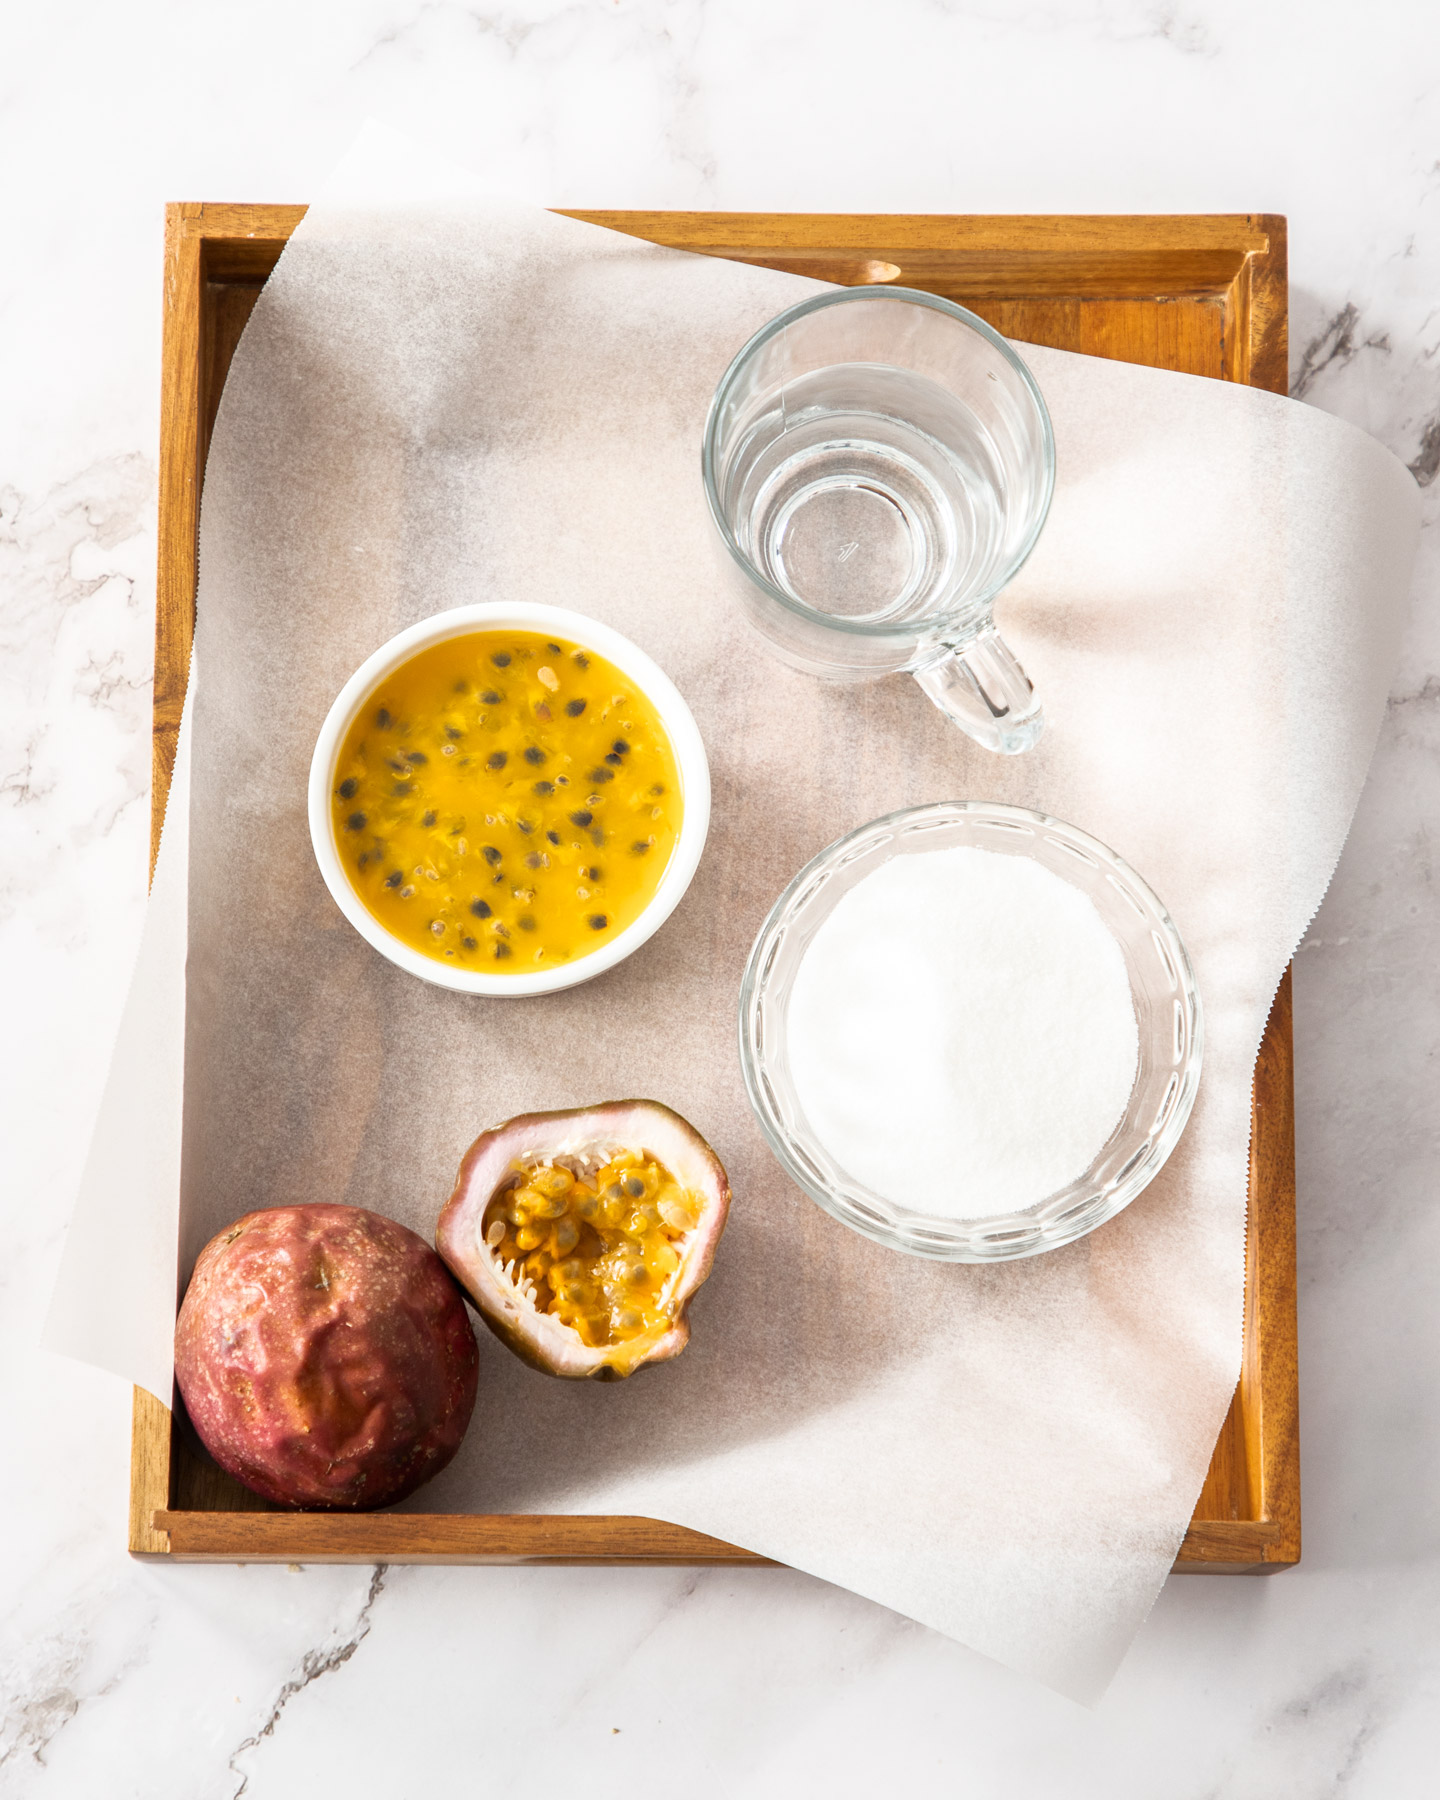 Ingredients for passionfruit syrup on a wooden tray.